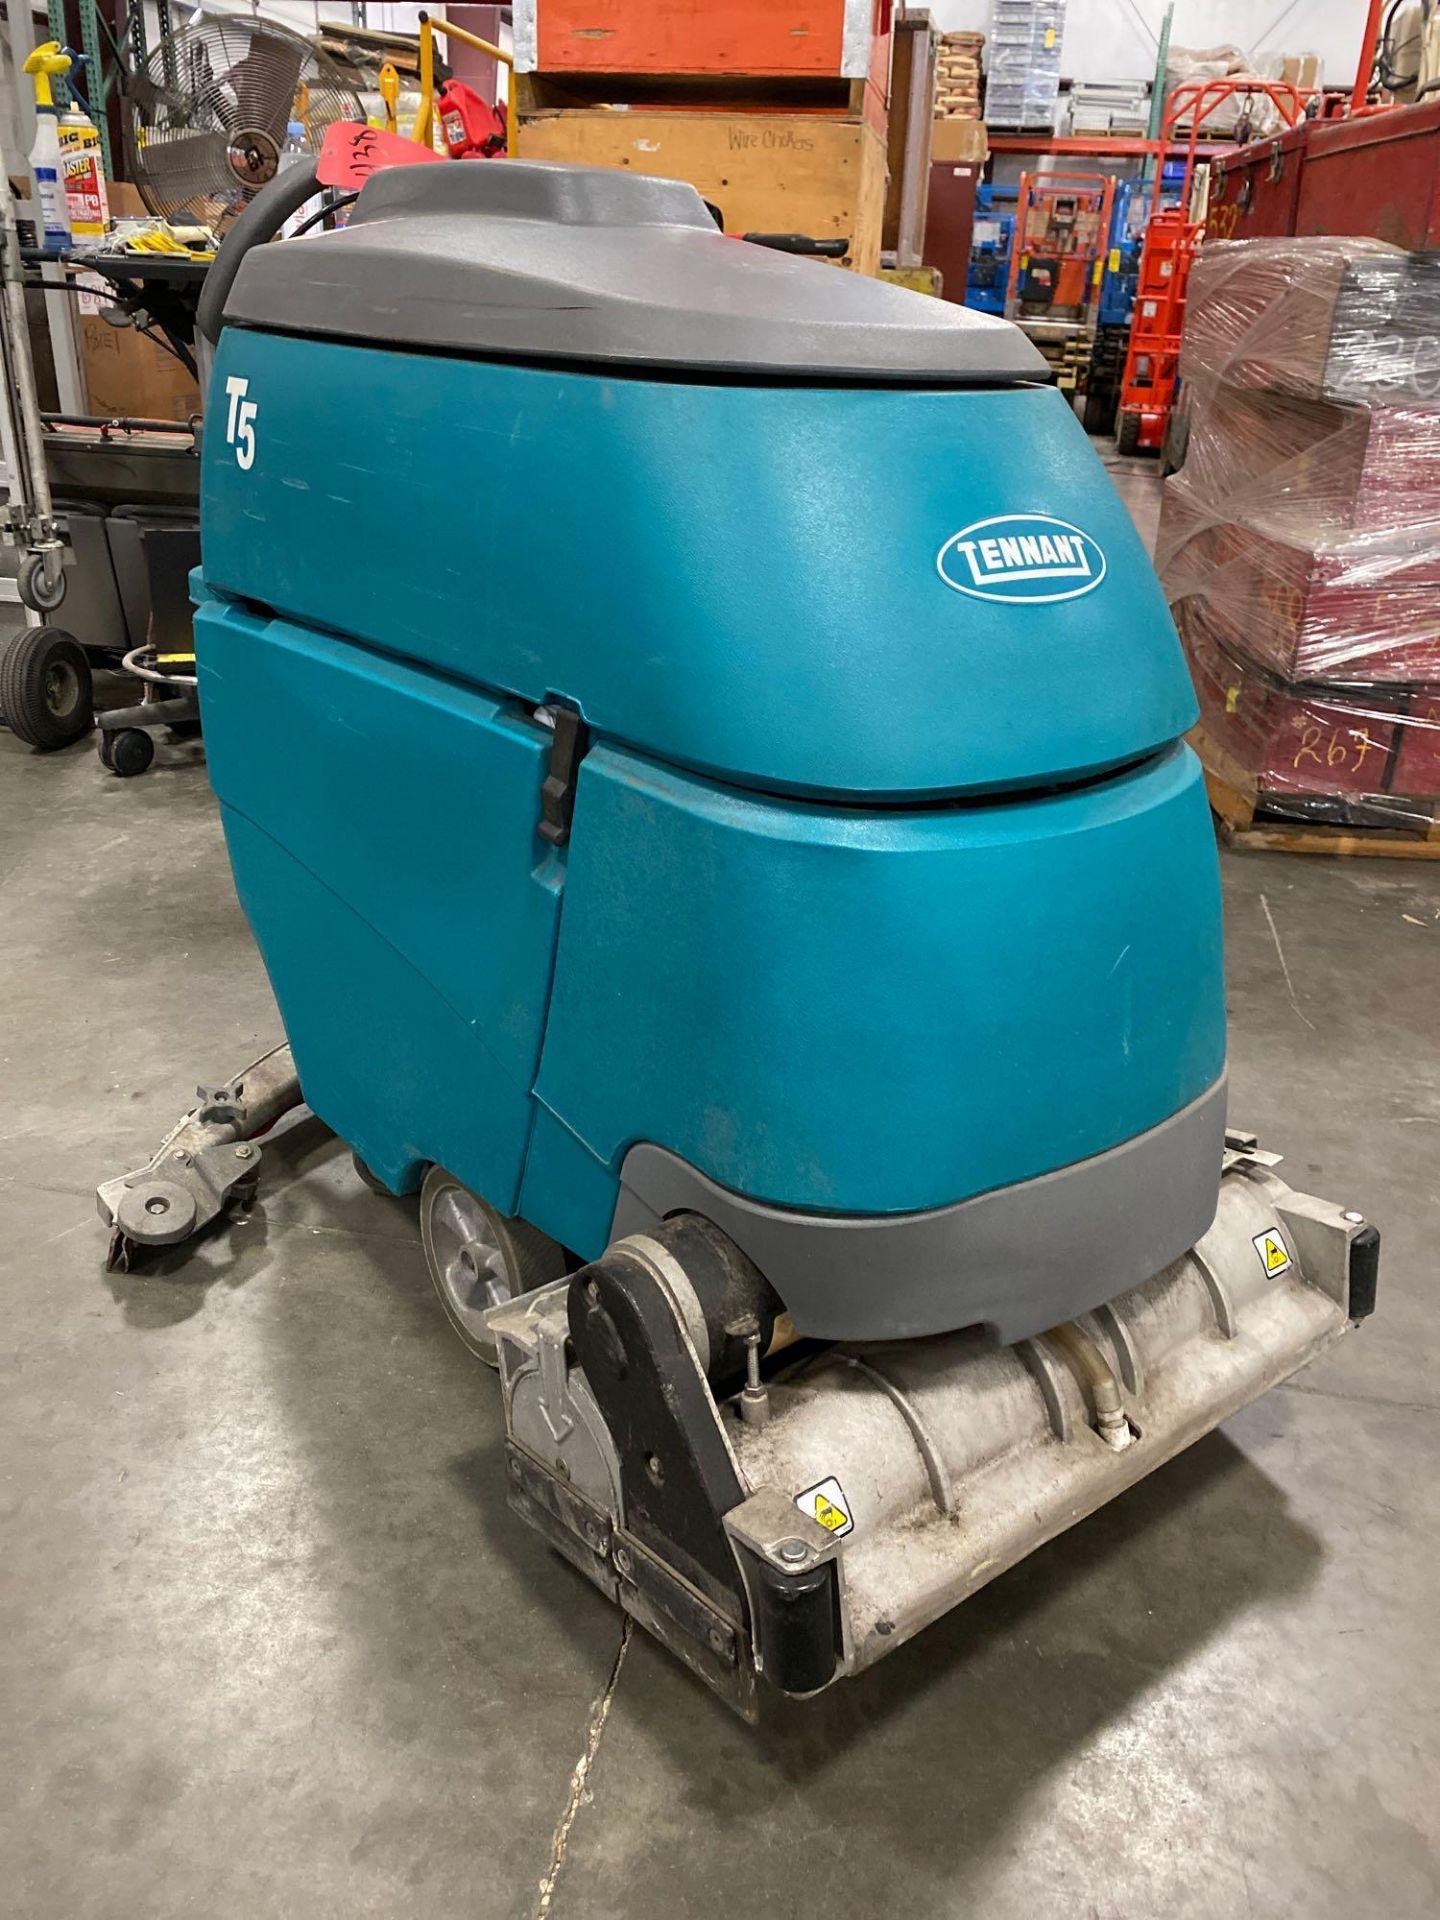 TENNANT T5 FLOOR SCRUBBER, BUILT IN BATTERY CHARGER, RUNS & OPERATES - Image 7 of 22